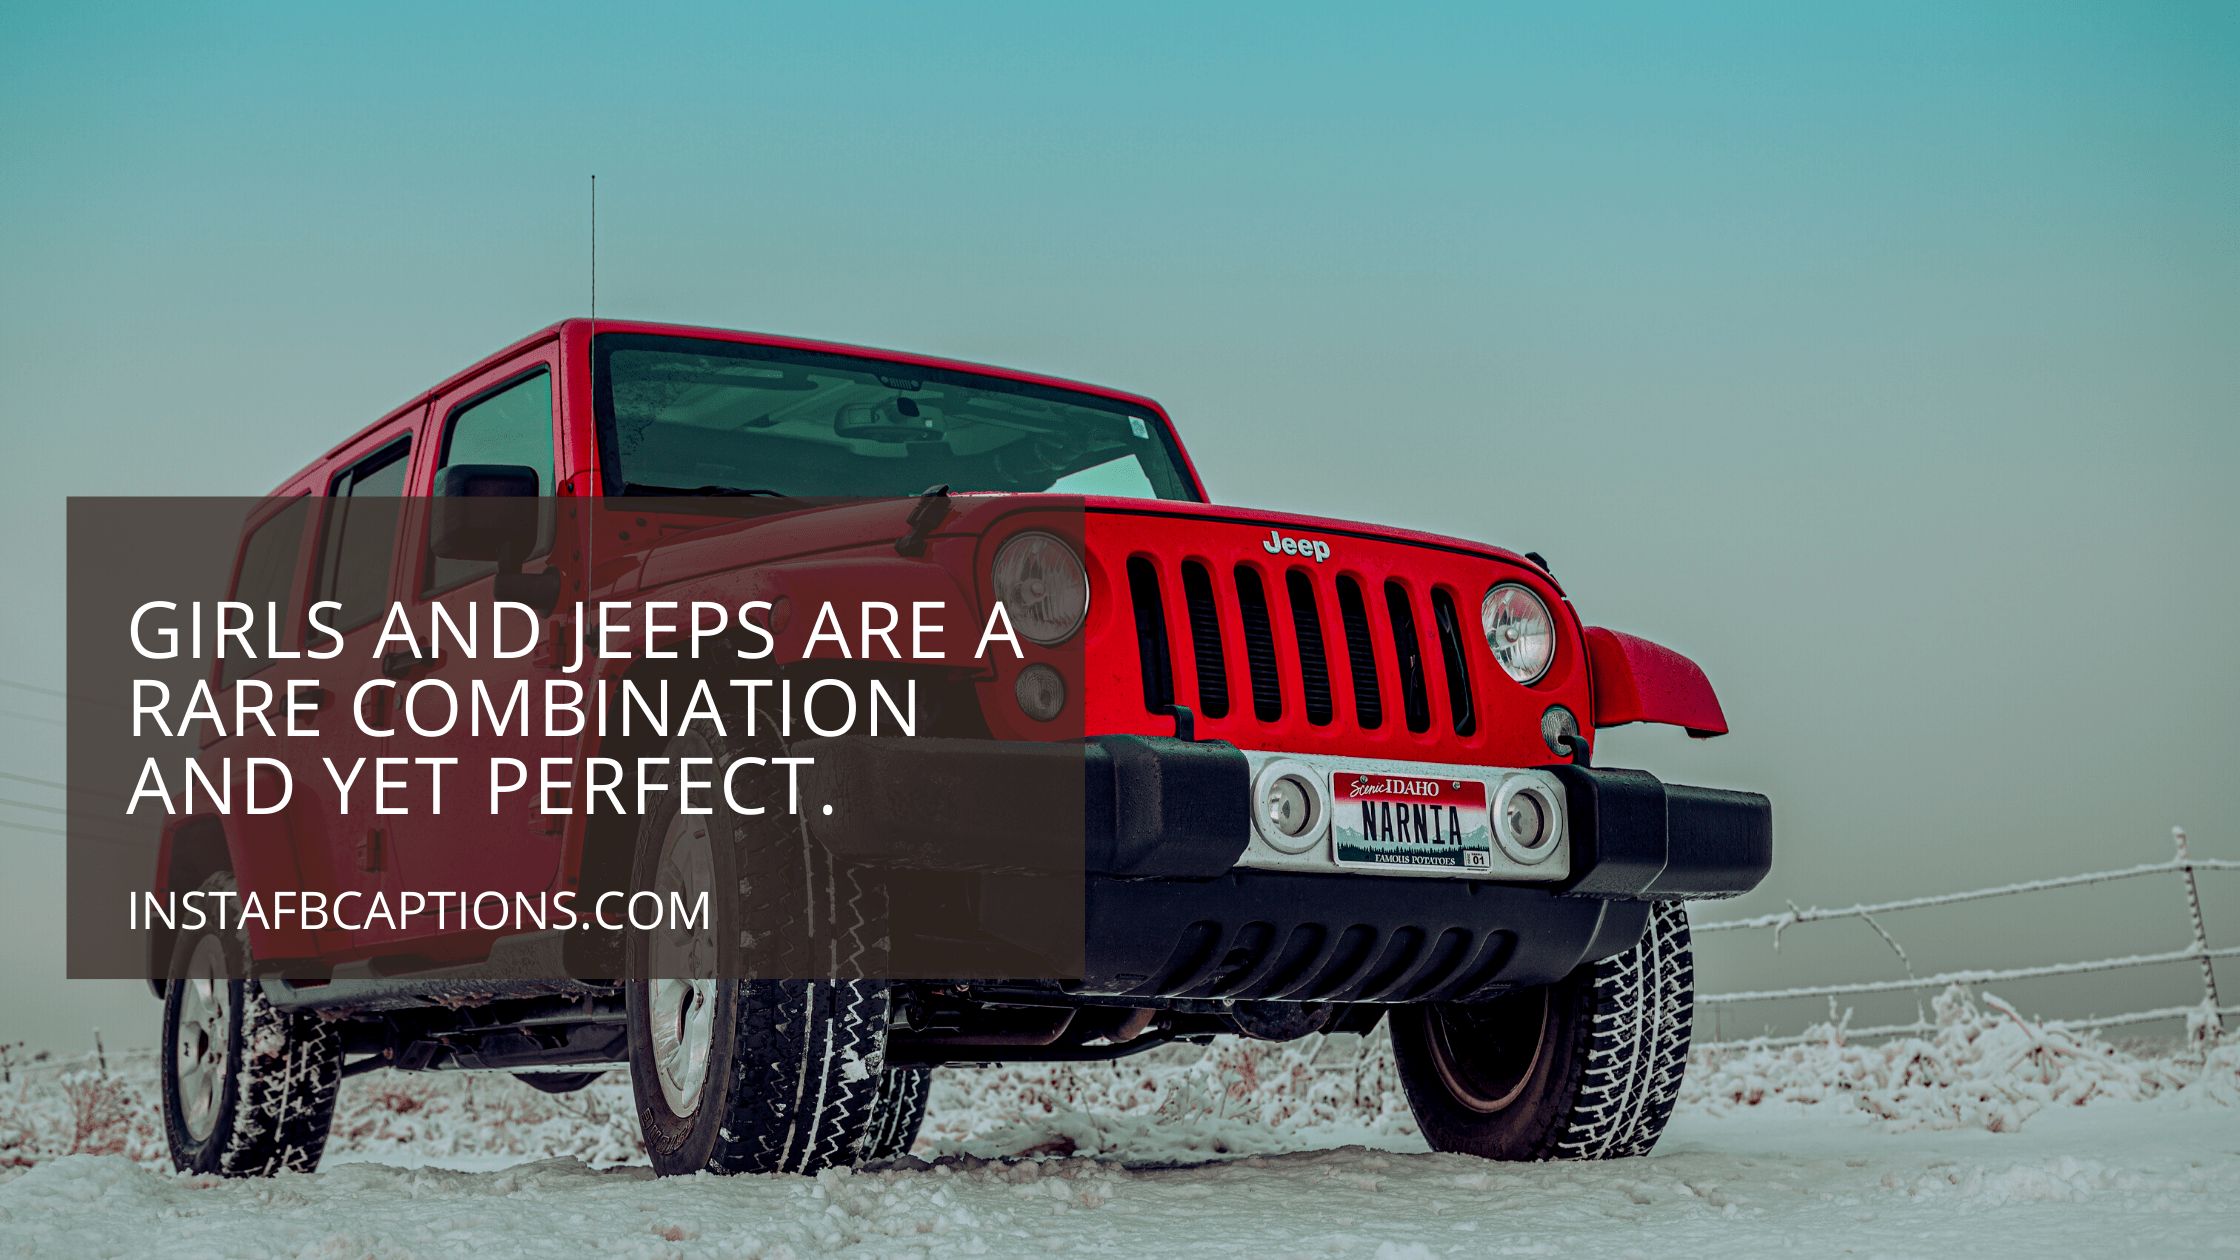 Cute Jeep Captions For Instagram  - Cute Jeep Captions for Instagram  - 92 Jeep Instagram Captions Quotes for 2023